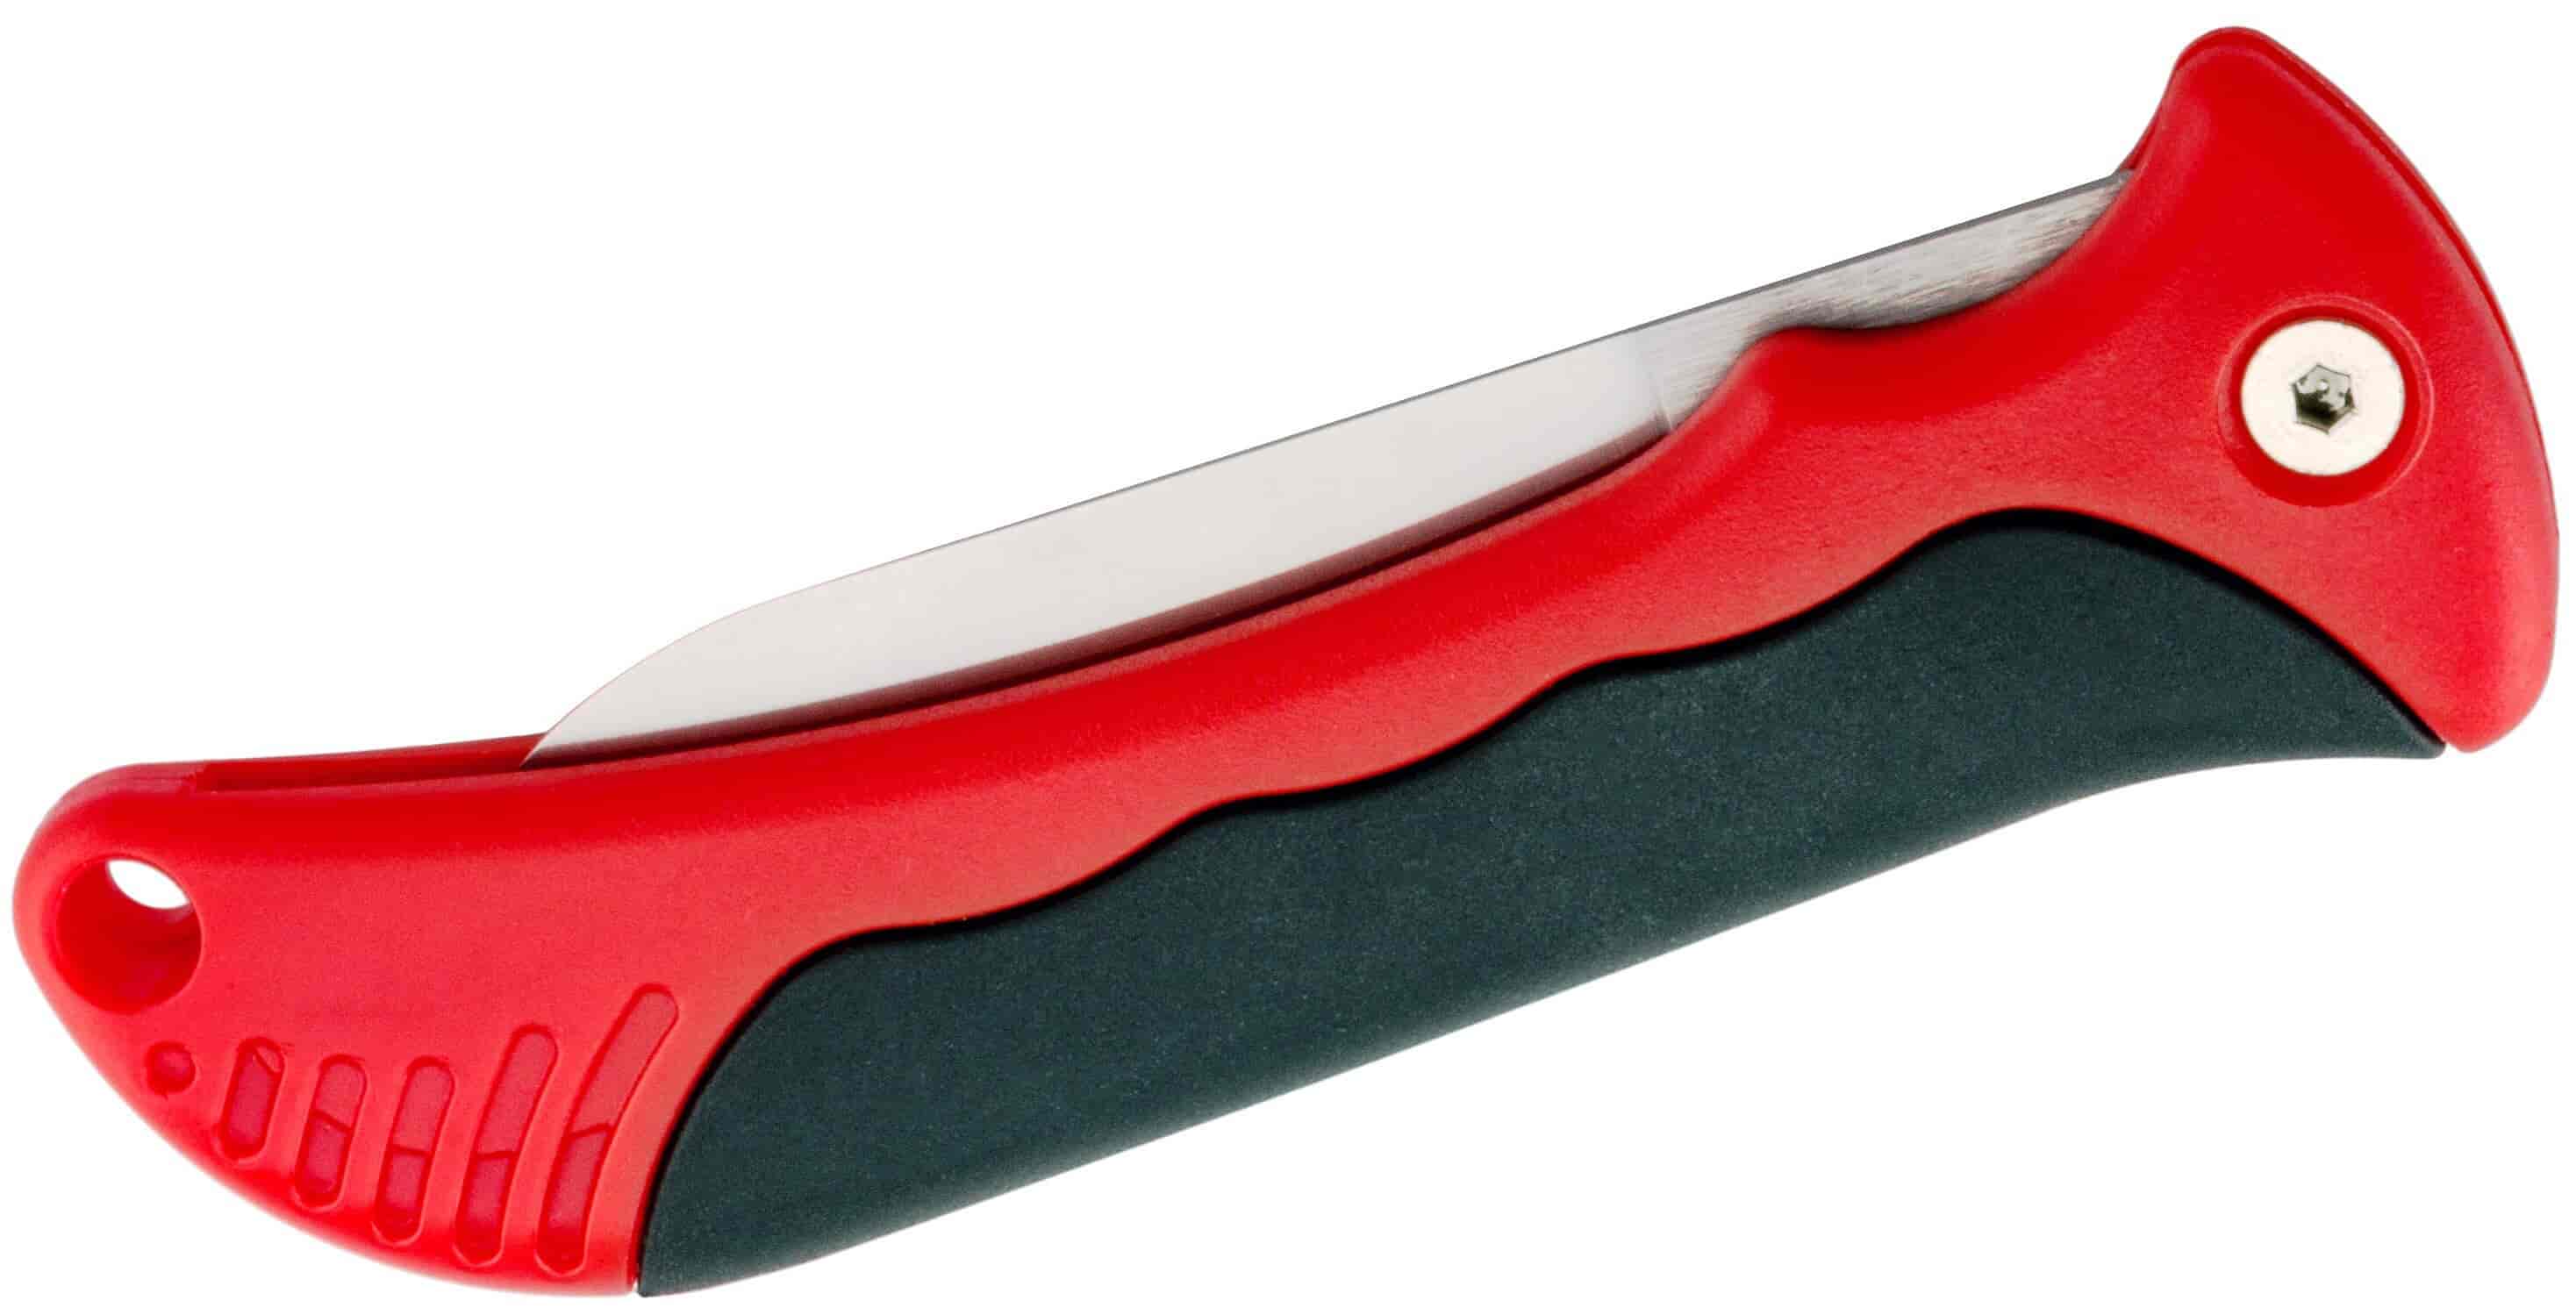 Cableknife - Electrician’s knife for quick and convenient cable and wire stripping